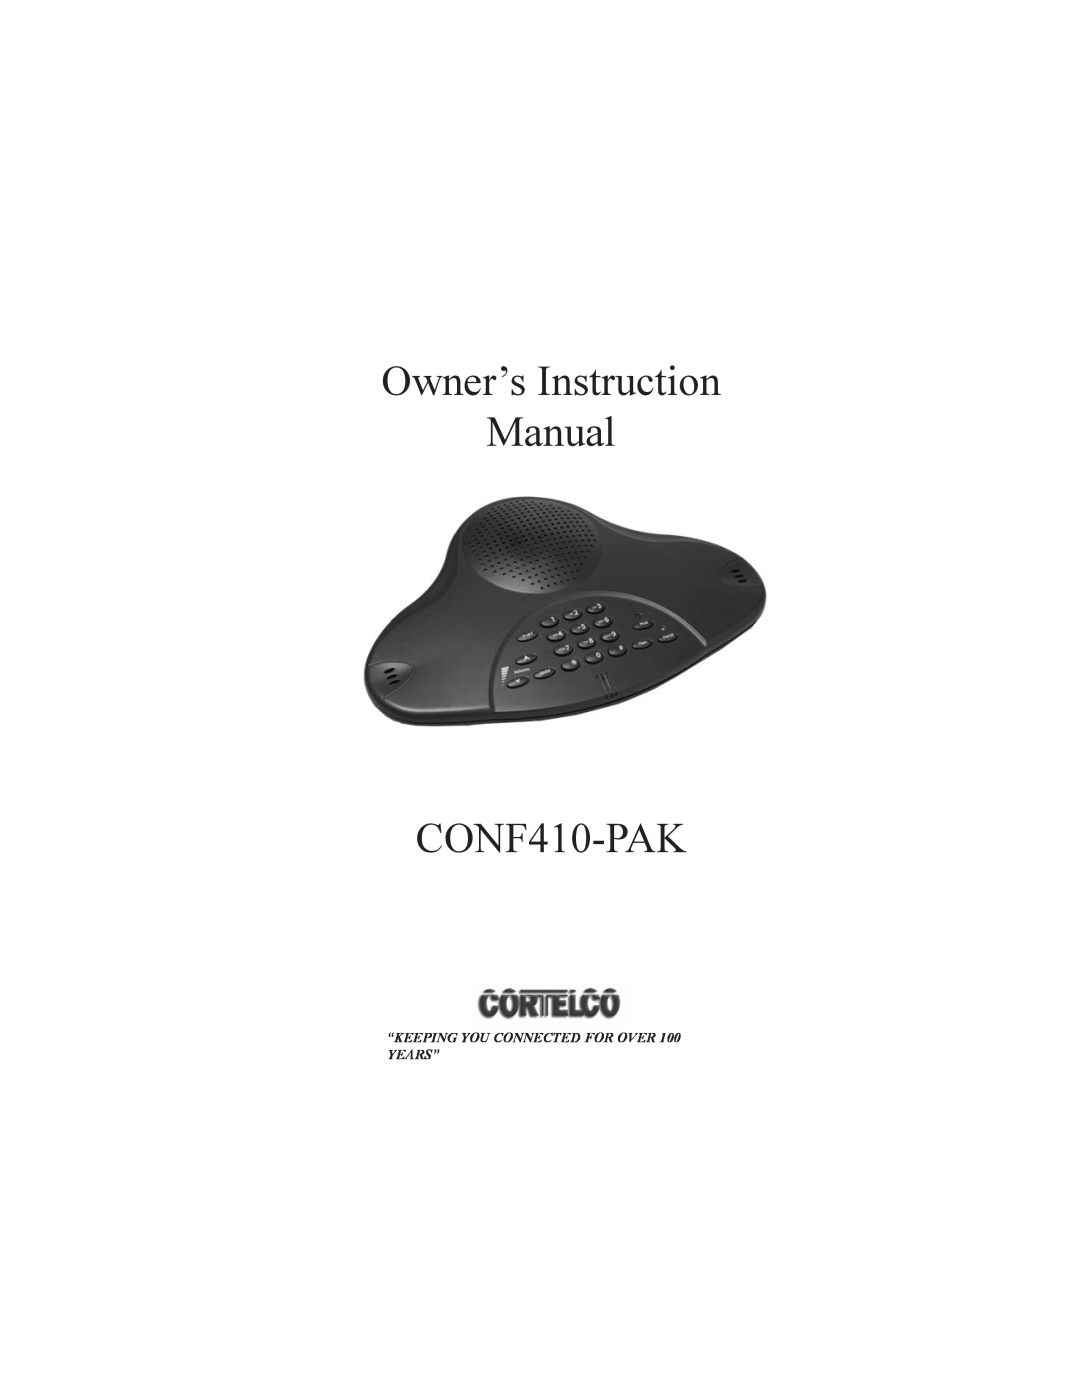 Cortelco CONF410PAK instruction manual Owner’s Instruction Manual CONF410-PAK, “KEEPING YOU CONNECTED FOR OVER 100 YEARS” 